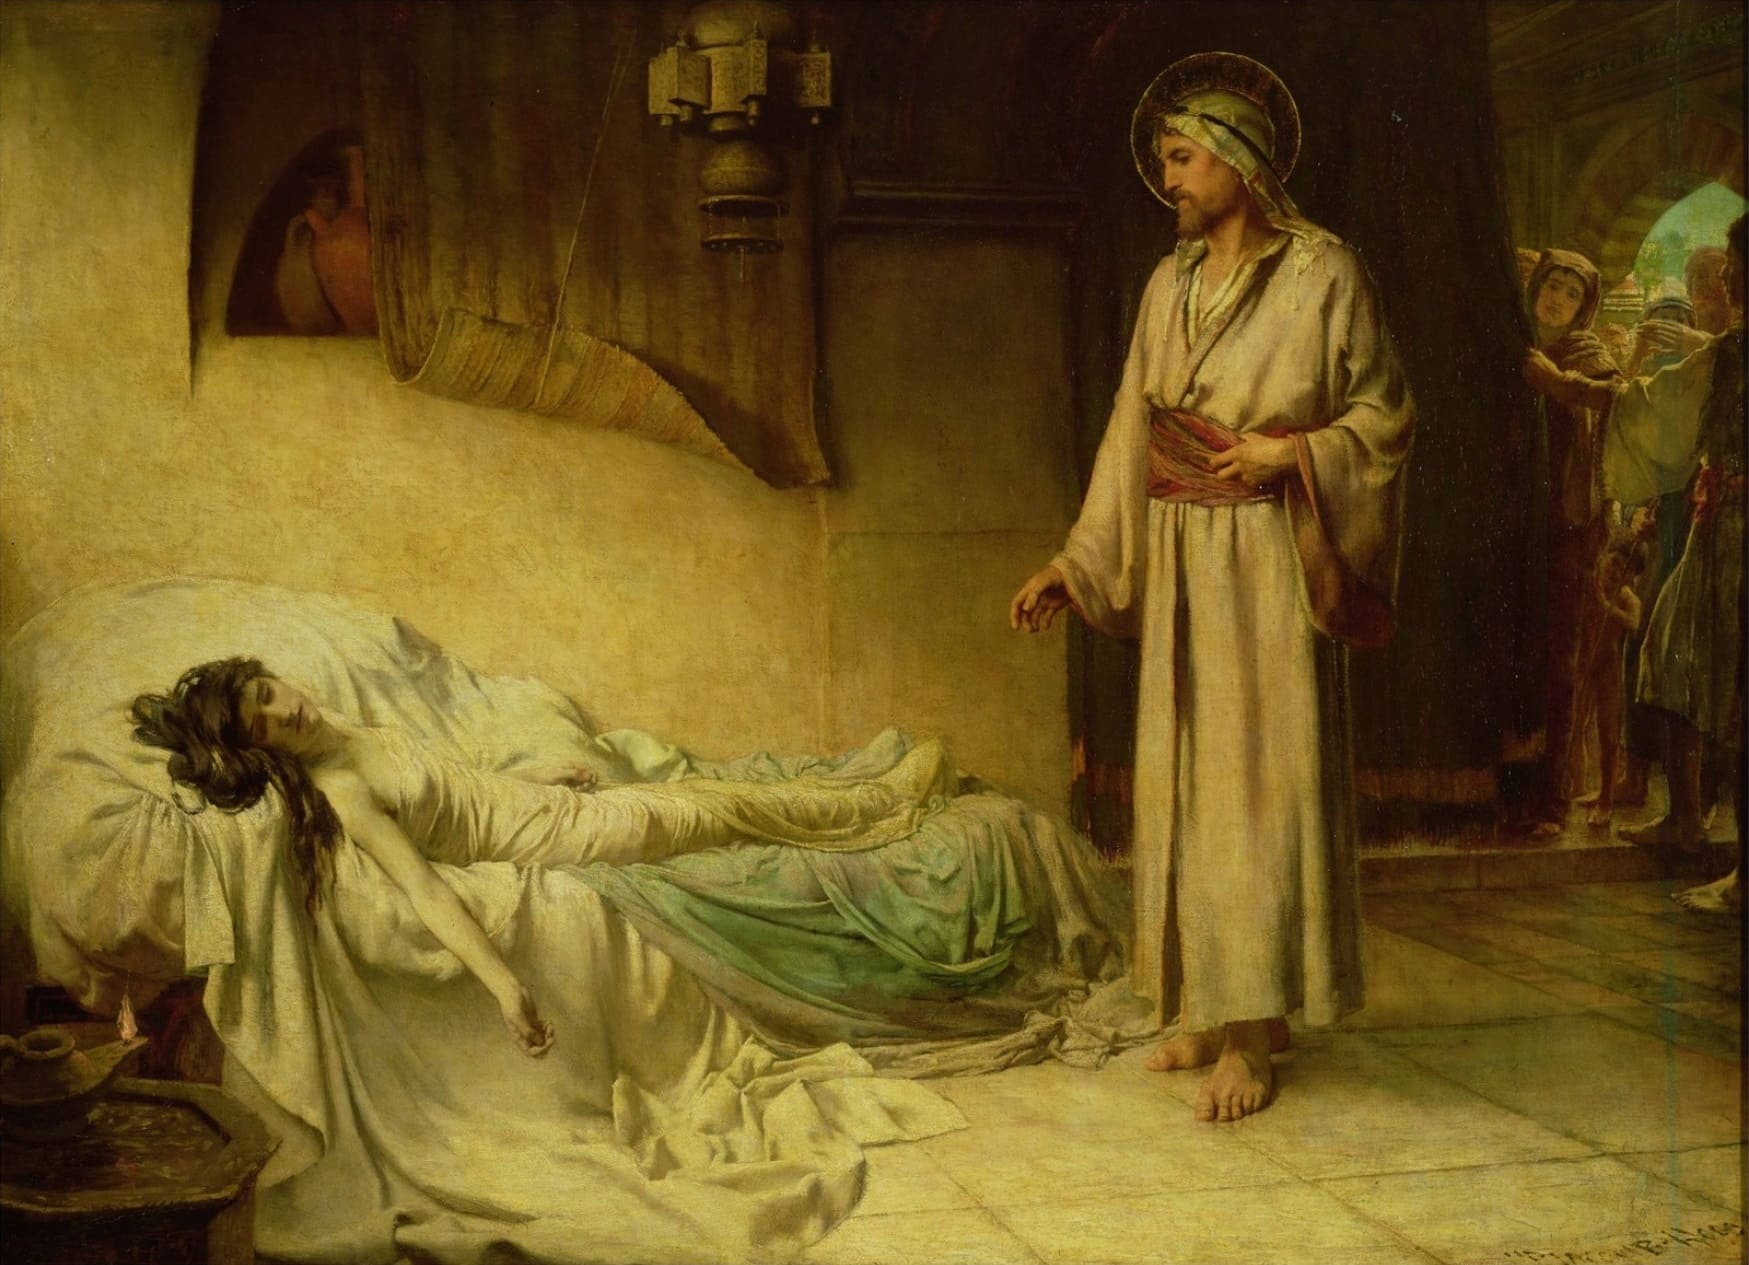 The healing of Jairus’ daughter – a few thoughts (Mark 5:21-43)